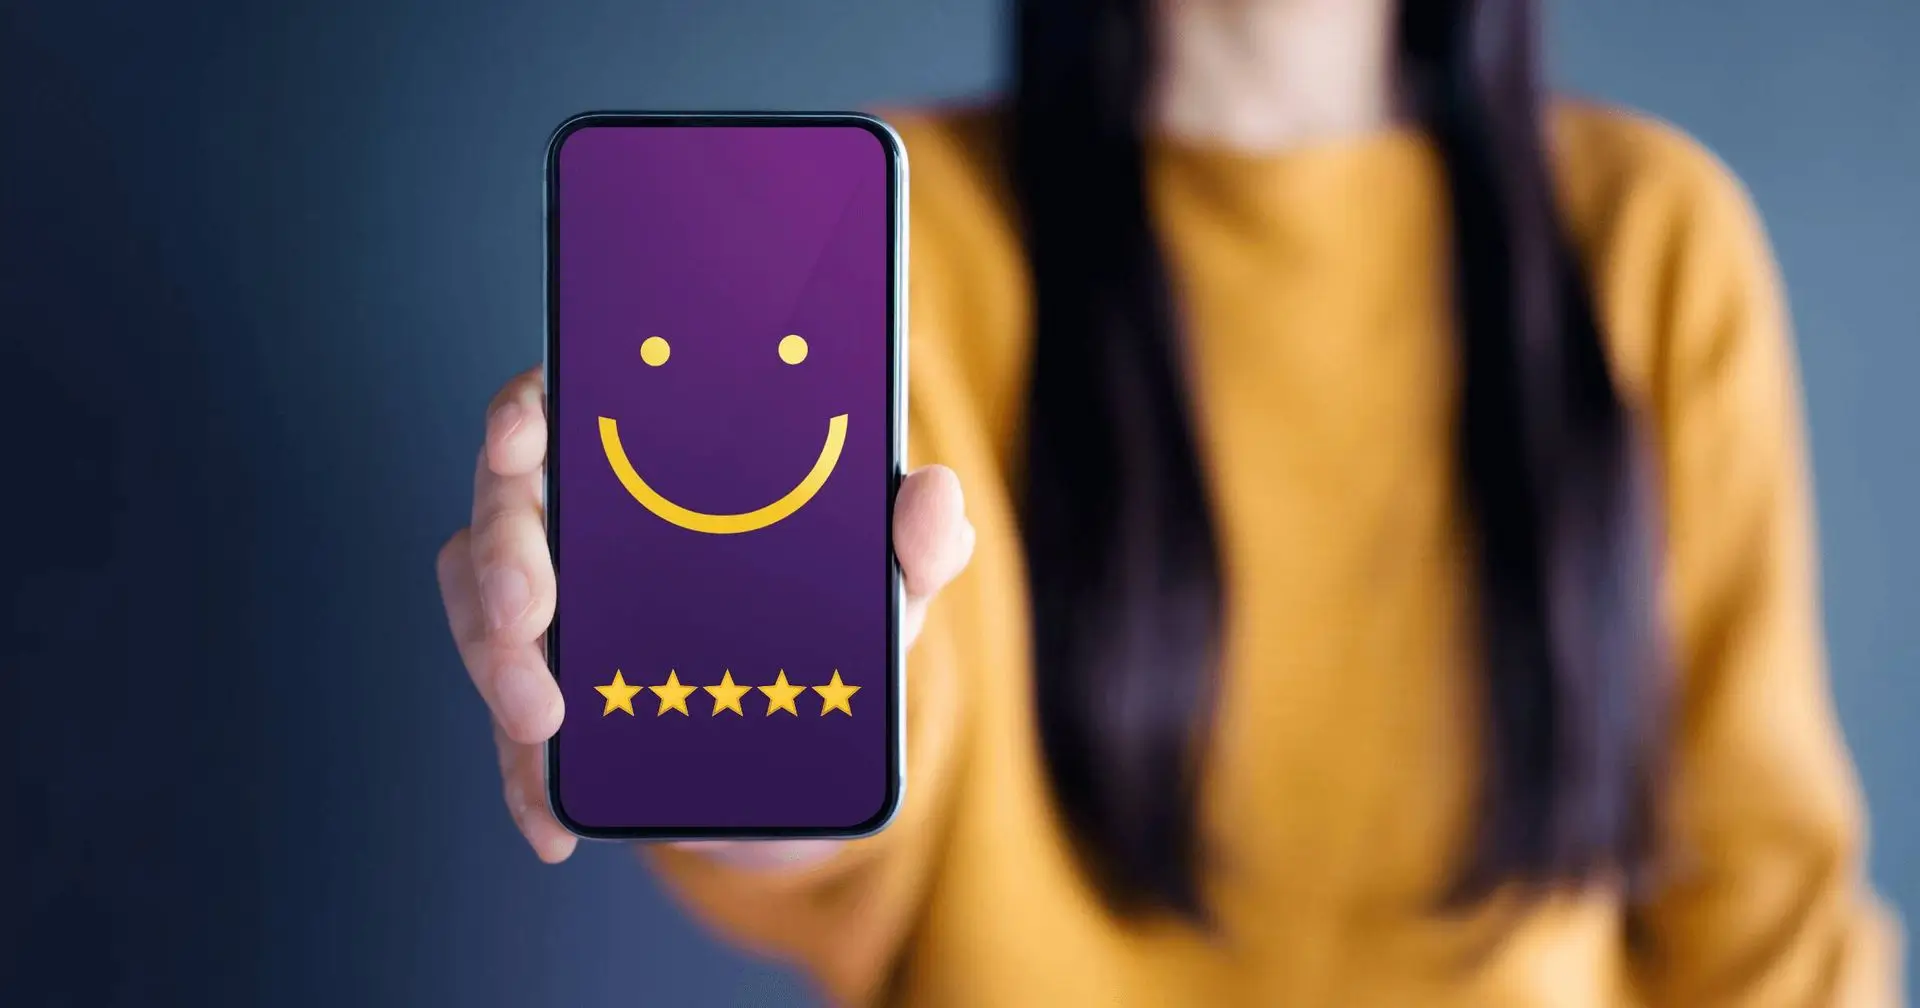 A woman is holding a phone with a smile emoji and 5-star ratings